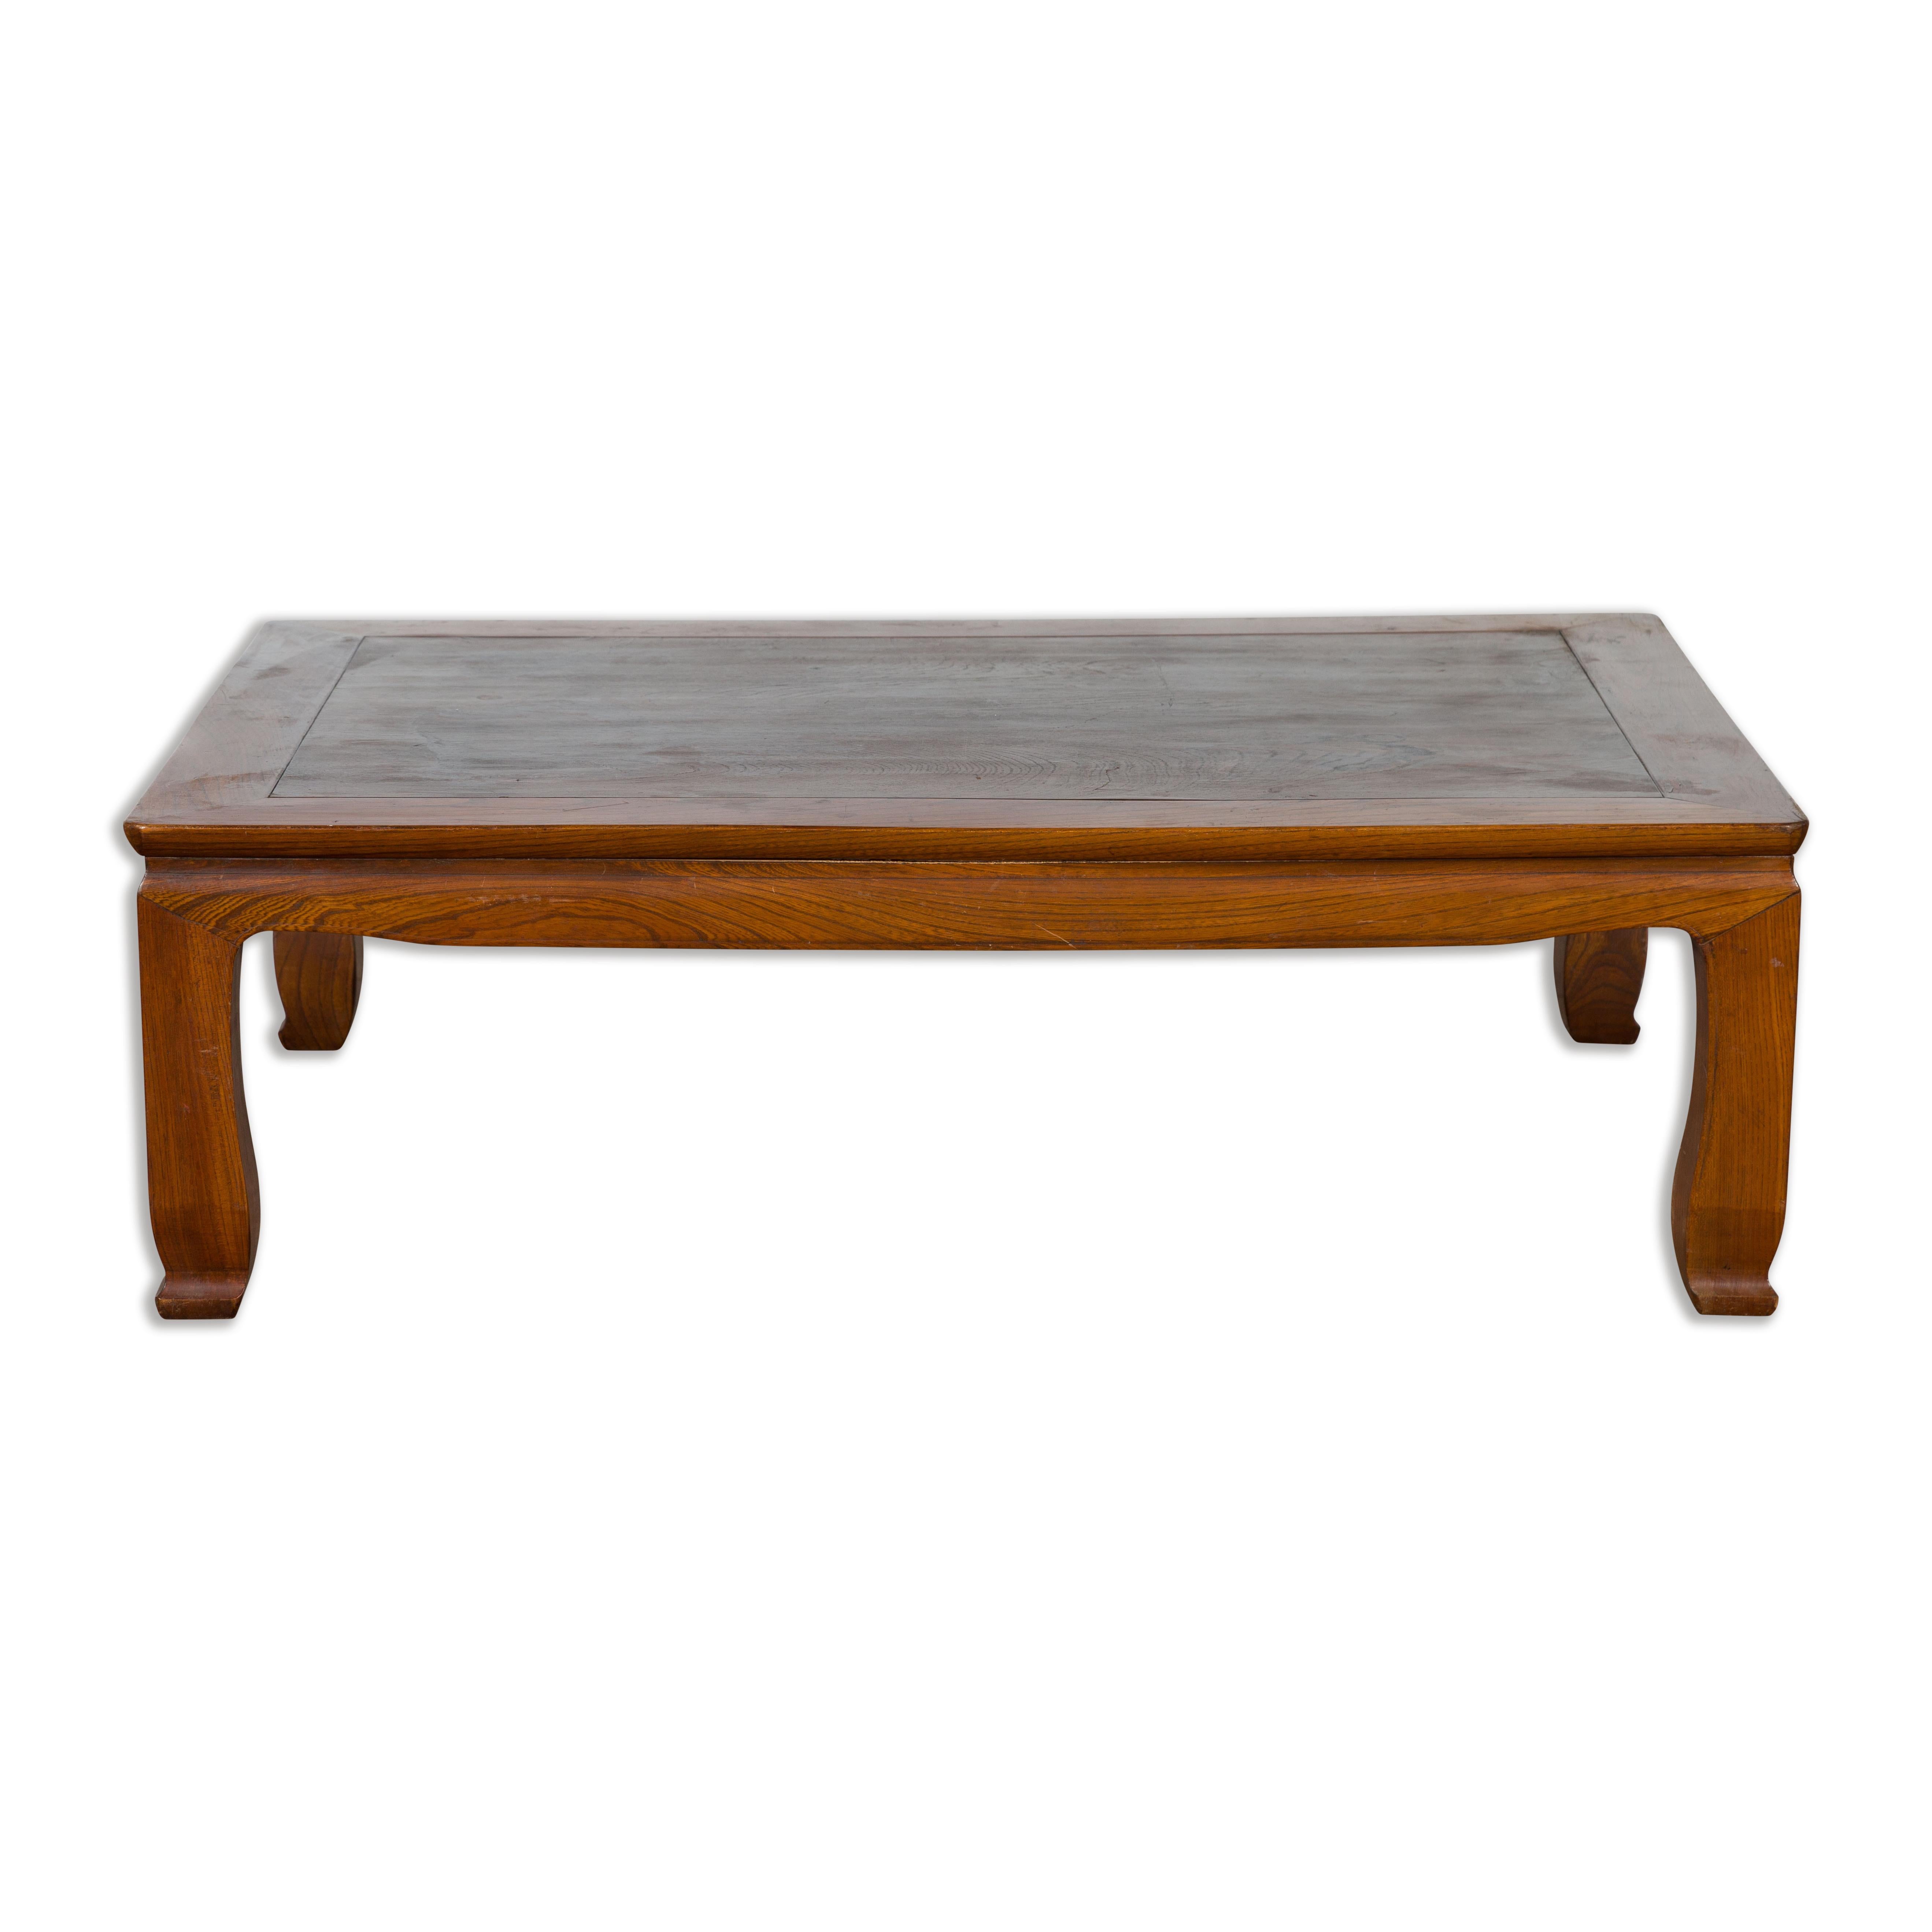 Chinese Vintage Low Coffee Table with Two-Toned Top and Curving Legs For Sale 7